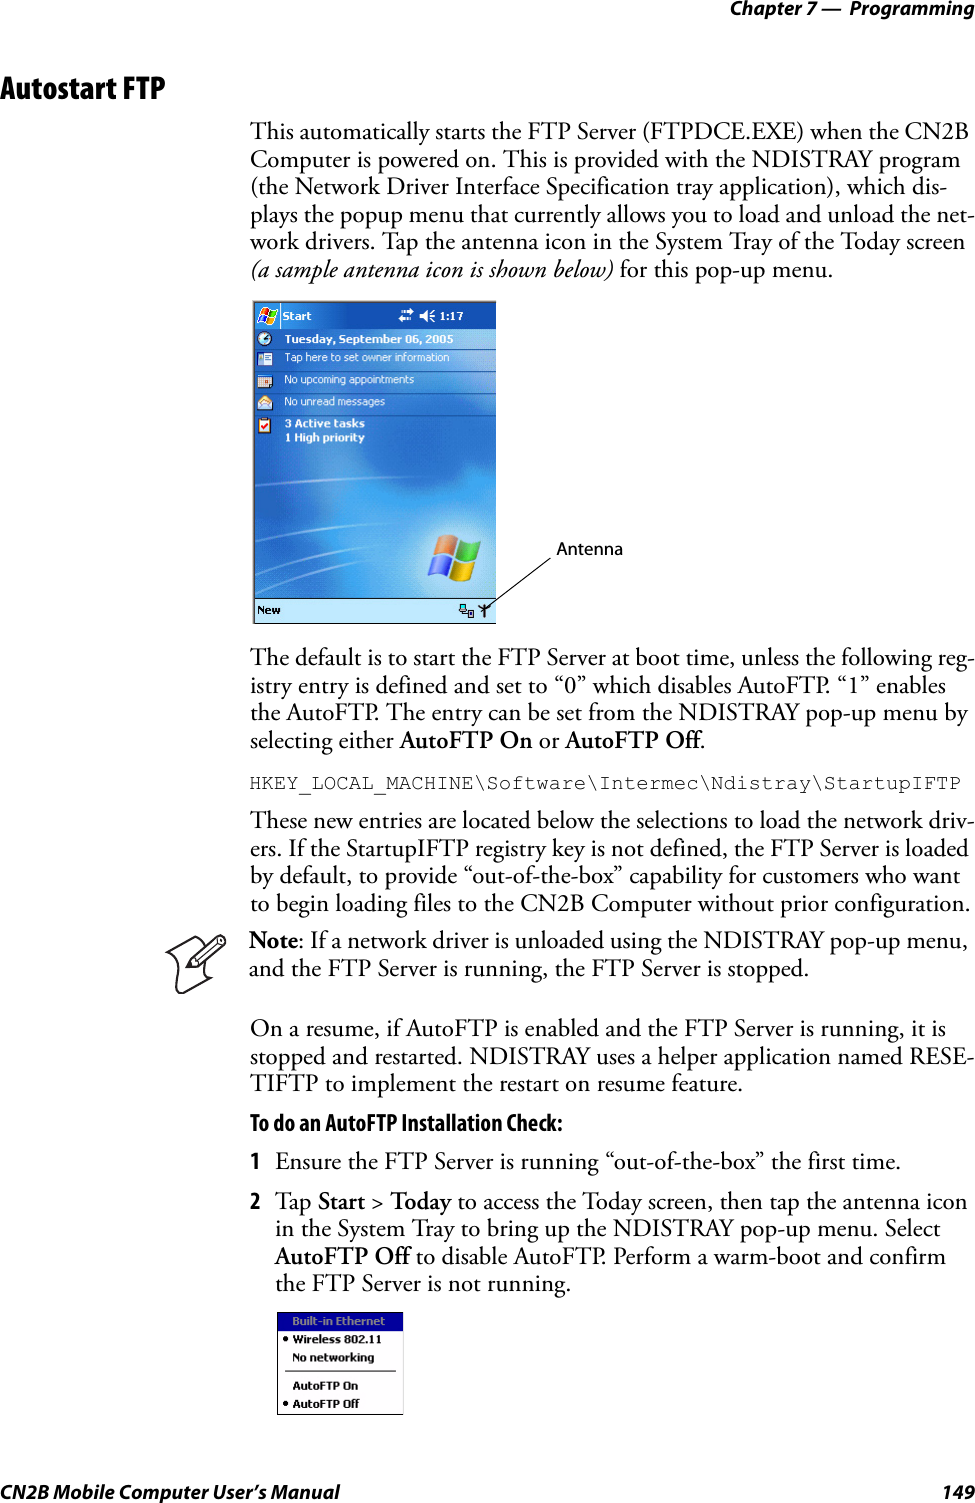 Chapter 7 —  ProgrammingCN2B Mobile Computer User’s Manual 149Autostart FTPThis automatically starts the FTP Server (FTPDCE.EXE) when the CN2B Computer is powered on. This is provided with the NDISTRAY program (the Network Driver Interface Specification tray application), which dis-plays the popup menu that currently allows you to load and unload the net-work drivers. Tap the antenna icon in the System Tray of the Today screen (a sample antenna icon is shown below) for this pop-up menu.The default is to start the FTP Server at boot time, unless the following reg-istry entry is defined and set to “0” which disables AutoFTP. “1” enables the AutoFTP. The entry can be set from the NDISTRAY pop-up menu by selecting either AutoFTP On or AutoFTP Off.HKEY_LOCAL_MACHINE\Software\Intermec\Ndistray\StartupIFTPThese new entries are located below the selections to load the network driv-ers. If the StartupIFTP registry key is not defined, the FTP Server is loaded by default, to provide “out-of-the-box” capability for customers who want to begin loading files to the CN2B Computer without prior configuration.On a resume, if AutoFTP is enabled and the FTP Server is running, it is stopped and restarted. NDISTRAY uses a helper application named RESE-TIFTP to implement the restart on resume feature. To do an AutoFTP Installation Check:1Ensure the FTP Server is running “out-of-the-box” the first time.2Tap  Start &gt; To d a y to access the Today screen, then tap the antenna icon in the System Tray to bring up the NDISTRAY pop-up menu. Select AutoFTP Off to disable AutoFTP. Perform a warm-boot and confirm the FTP Server is not running.Note: If a network driver is unloaded using the NDISTRAY pop-up menu, and the FTP Server is running, the FTP Server is stopped.Antenna